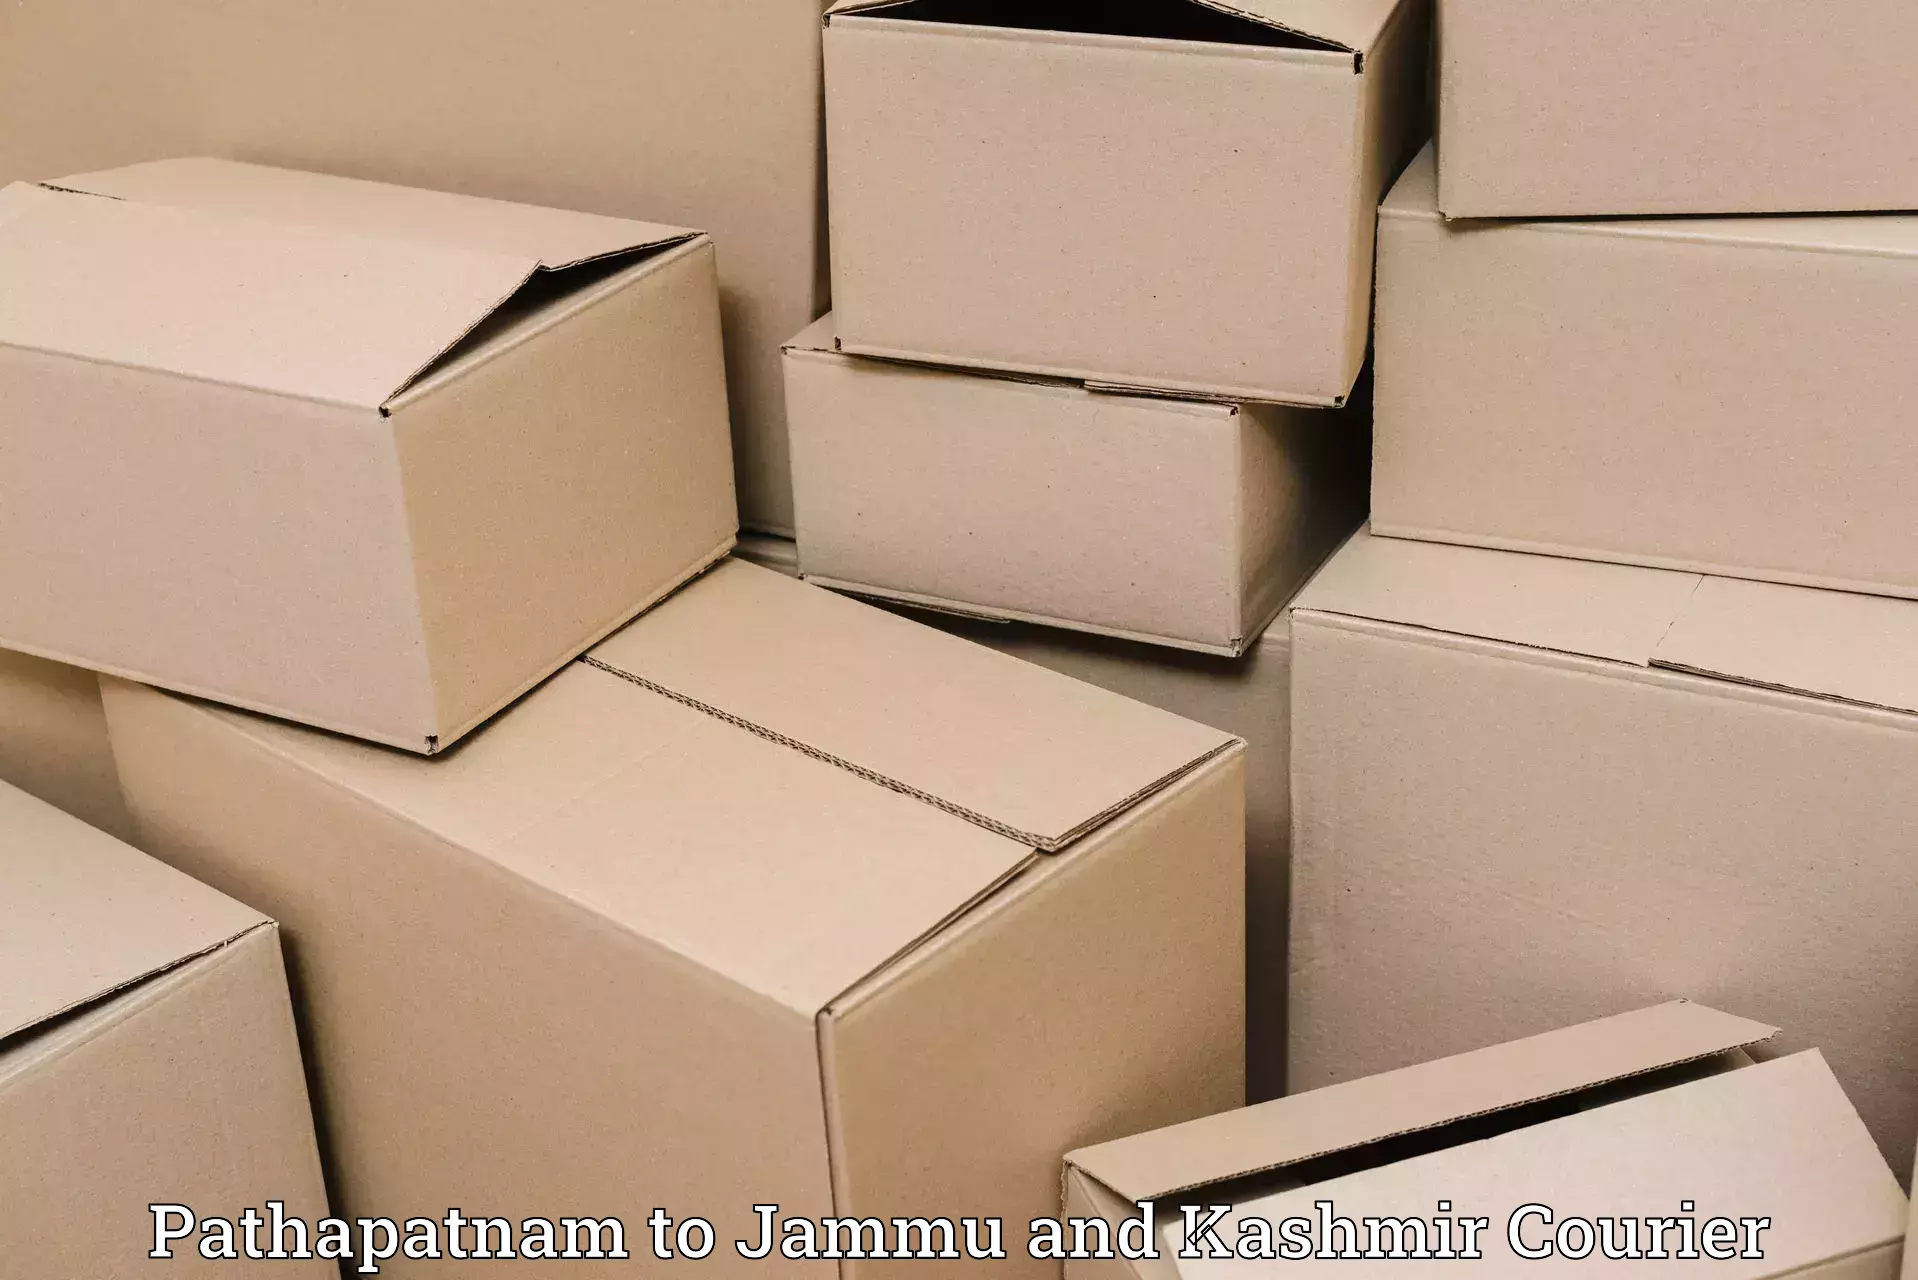 Speedy delivery service Pathapatnam to Shopian